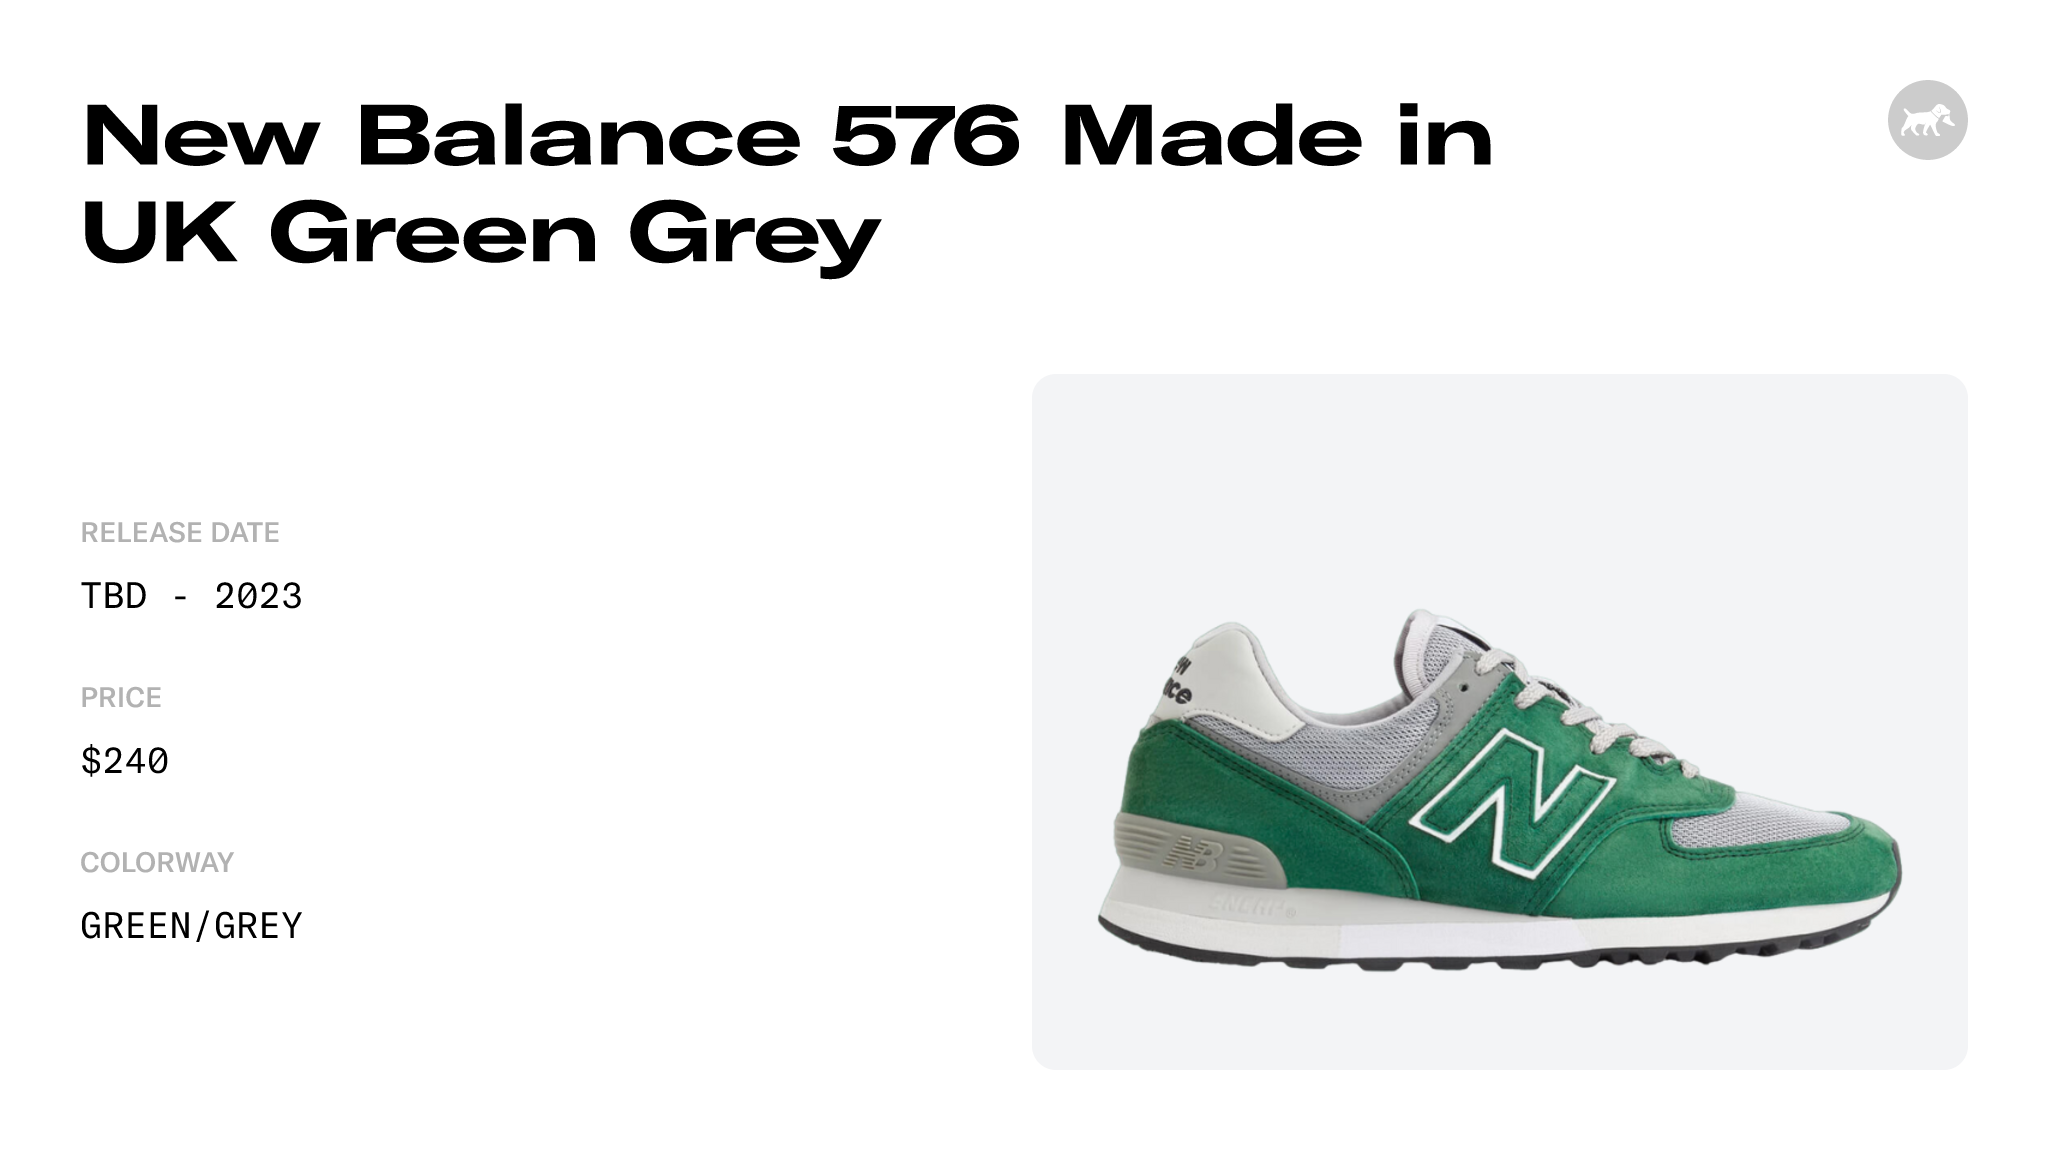 New Balance 576 Made in UK Green Grey - OU576GGK Raffles and Release Date